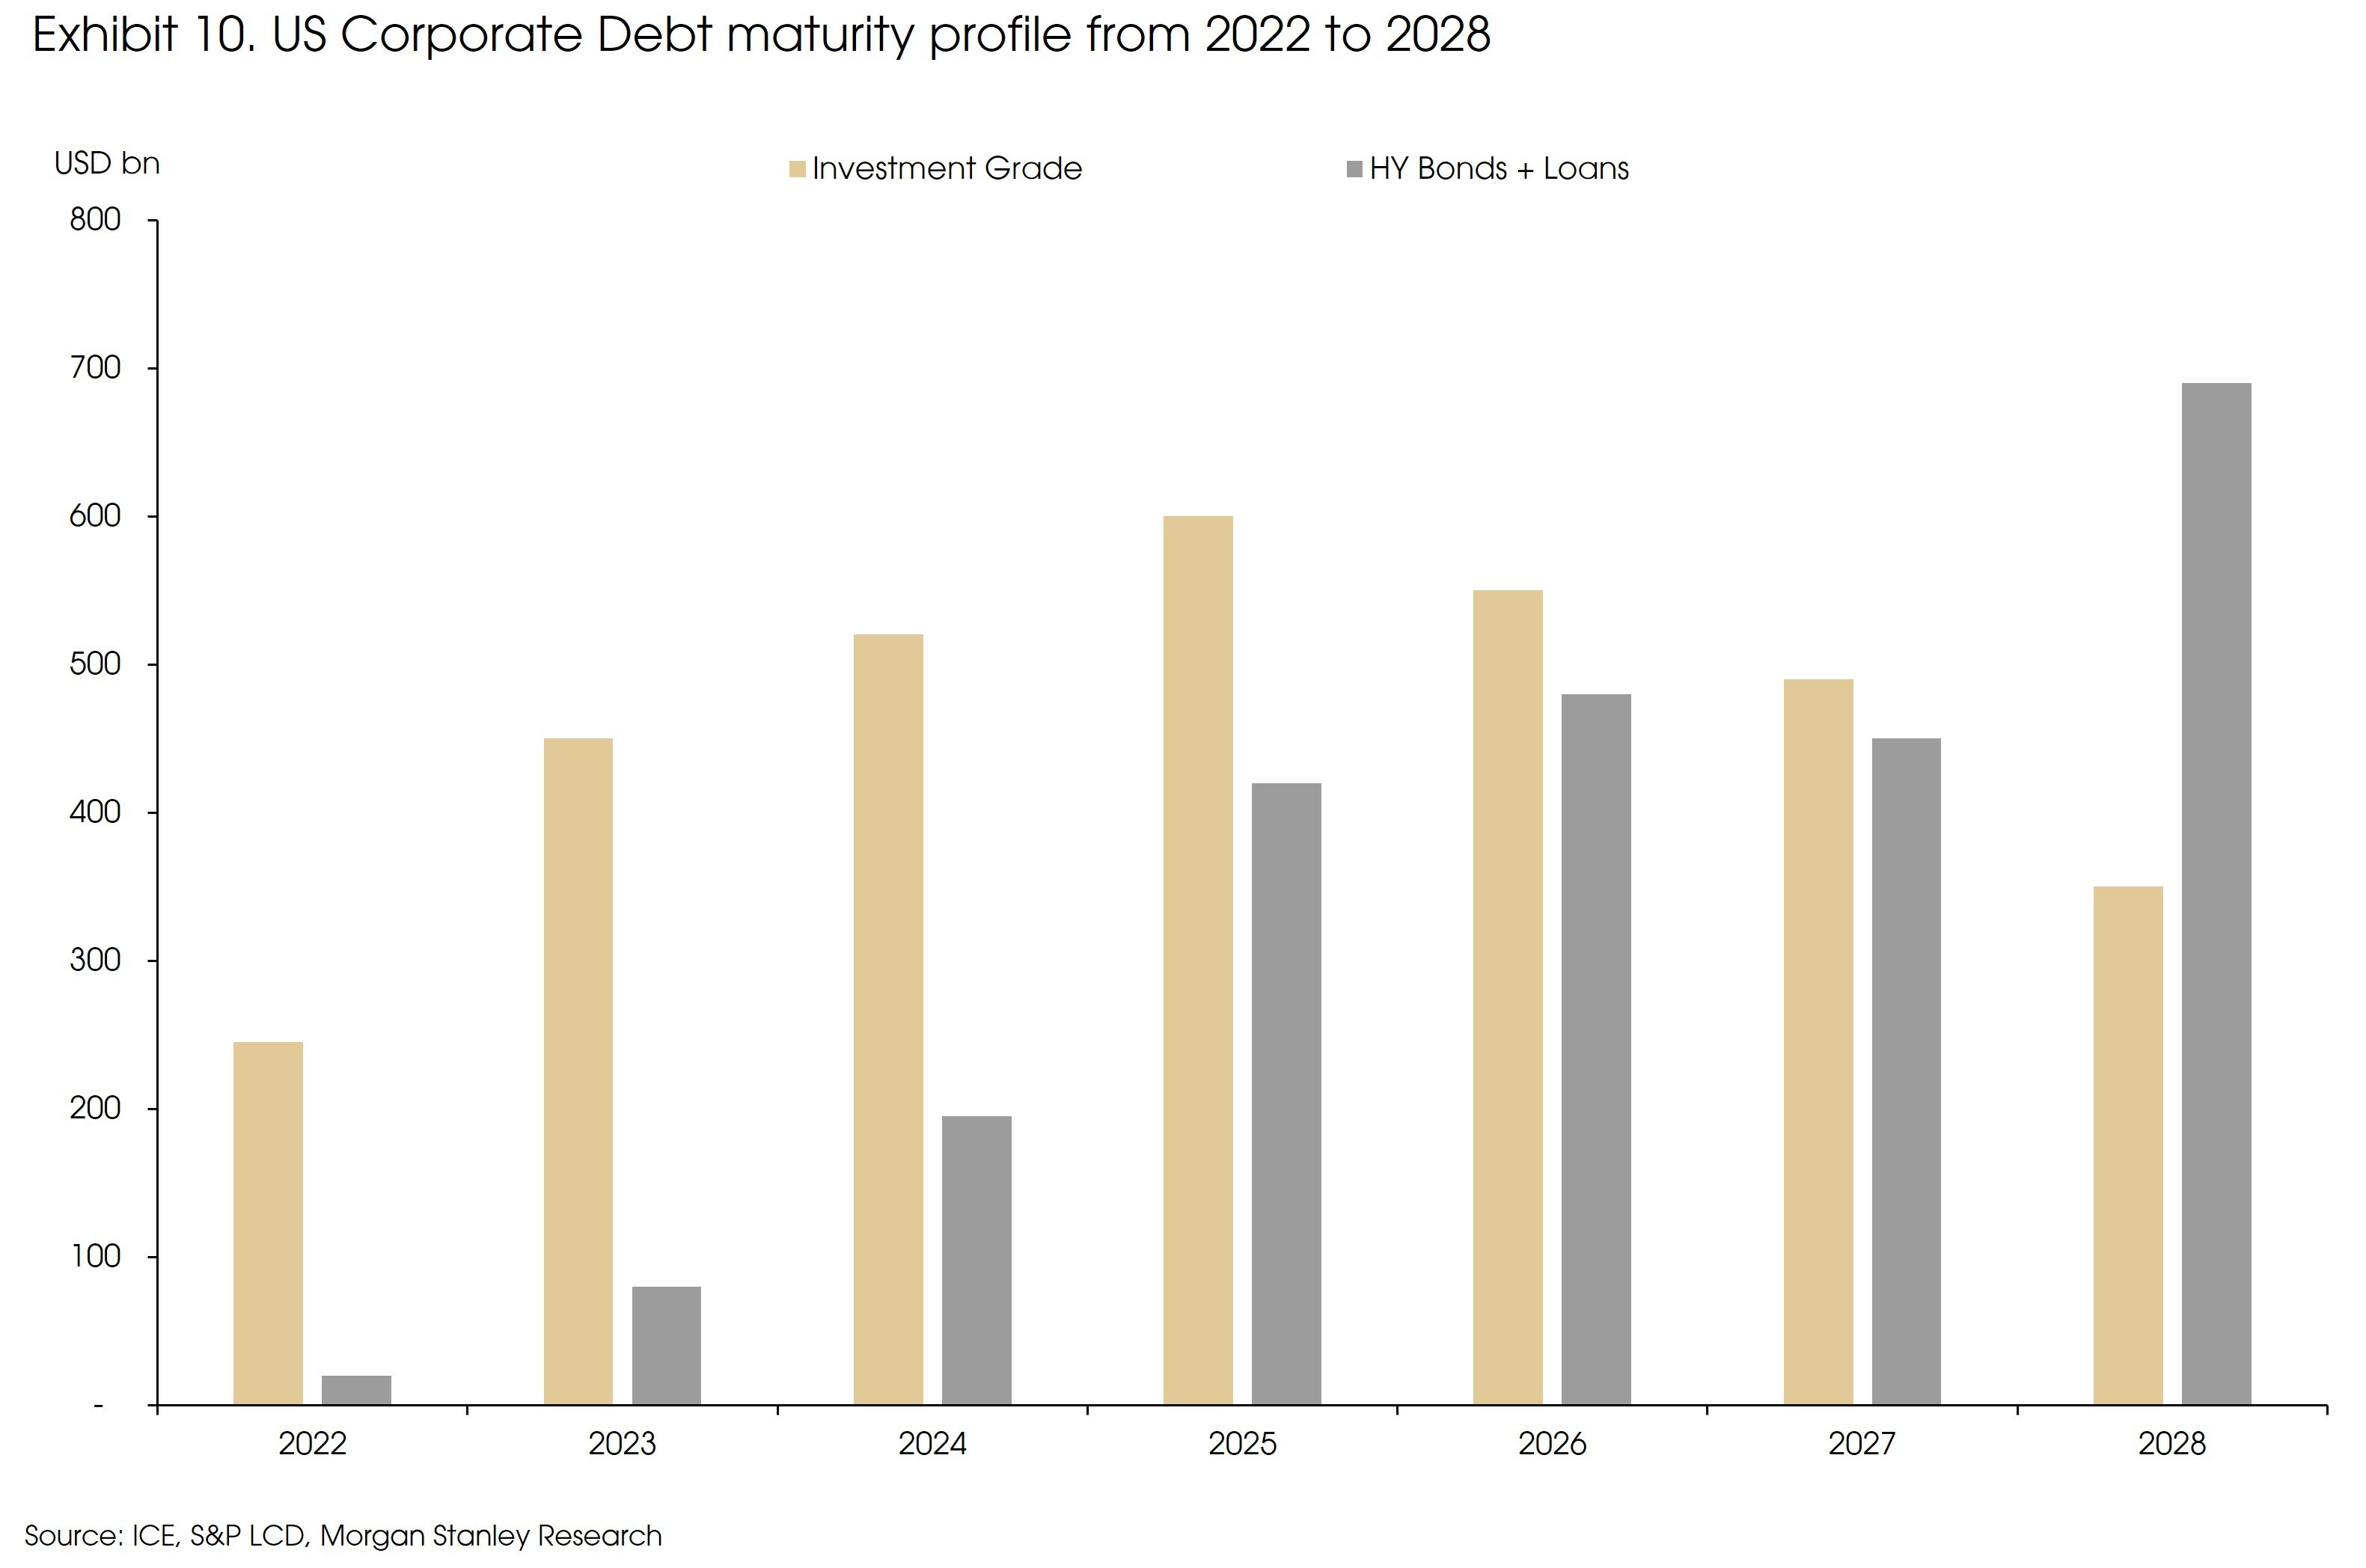 Exhibit 10 US Corporate Debt Maturity Profile From 2022 to 2028